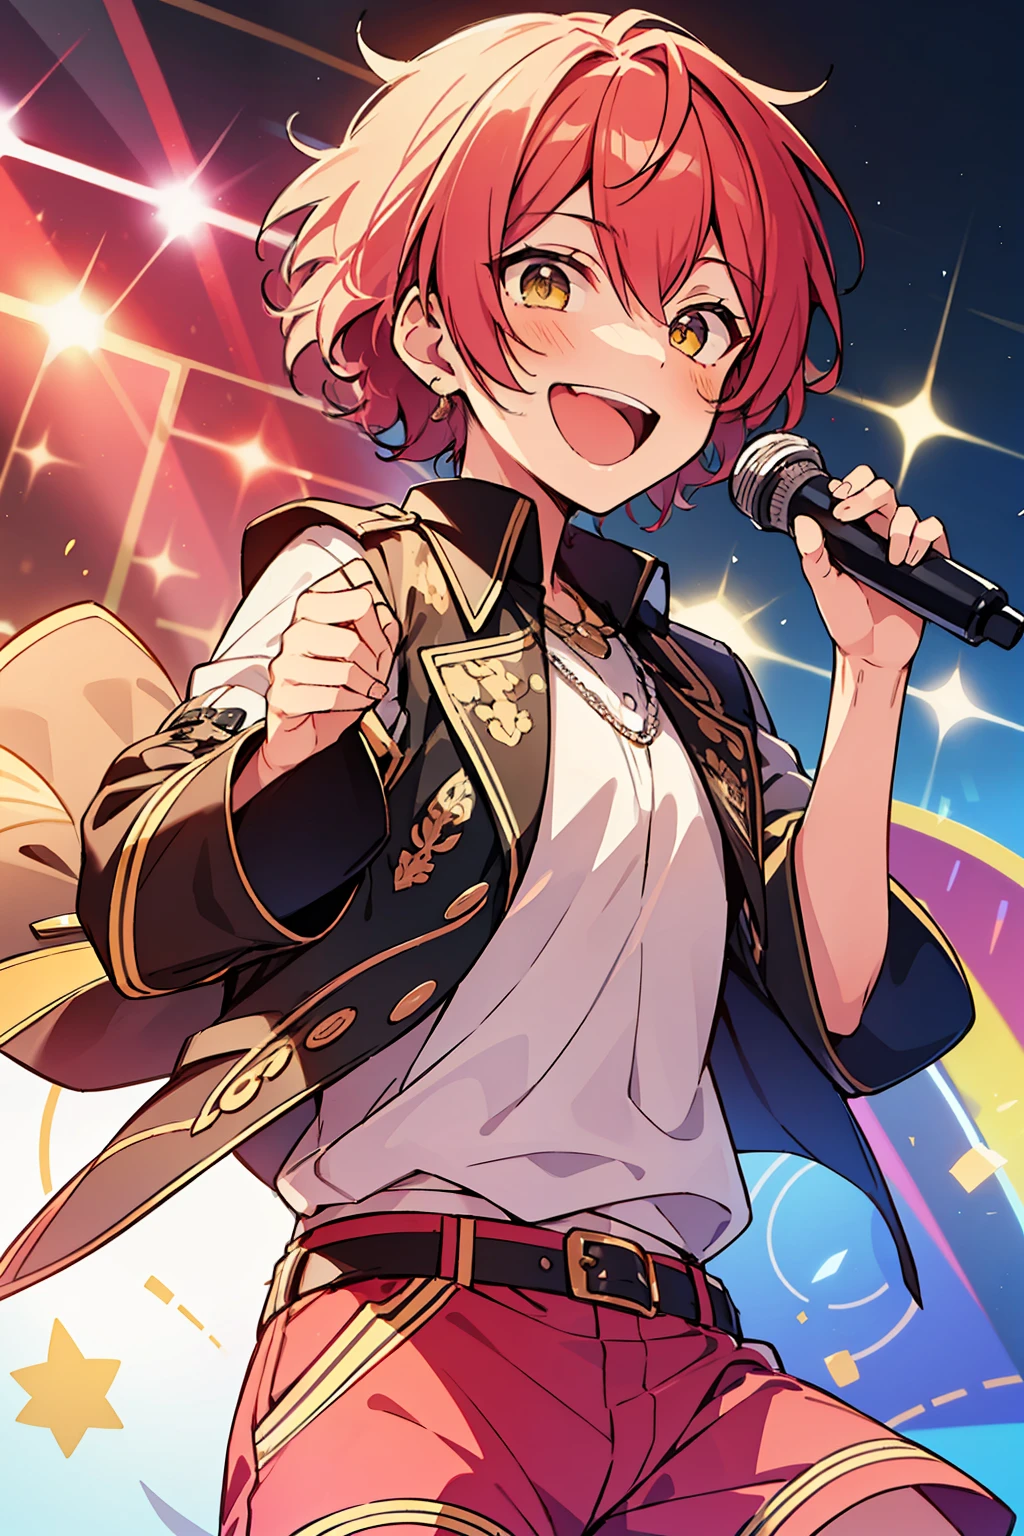 (high-quality, breathtaking),(expressive eyes, perfect face), 1boy, male, solo, short, young boy, curly peach pink hair, yellow eyes, laugh, idol outfit, shorts, on stage